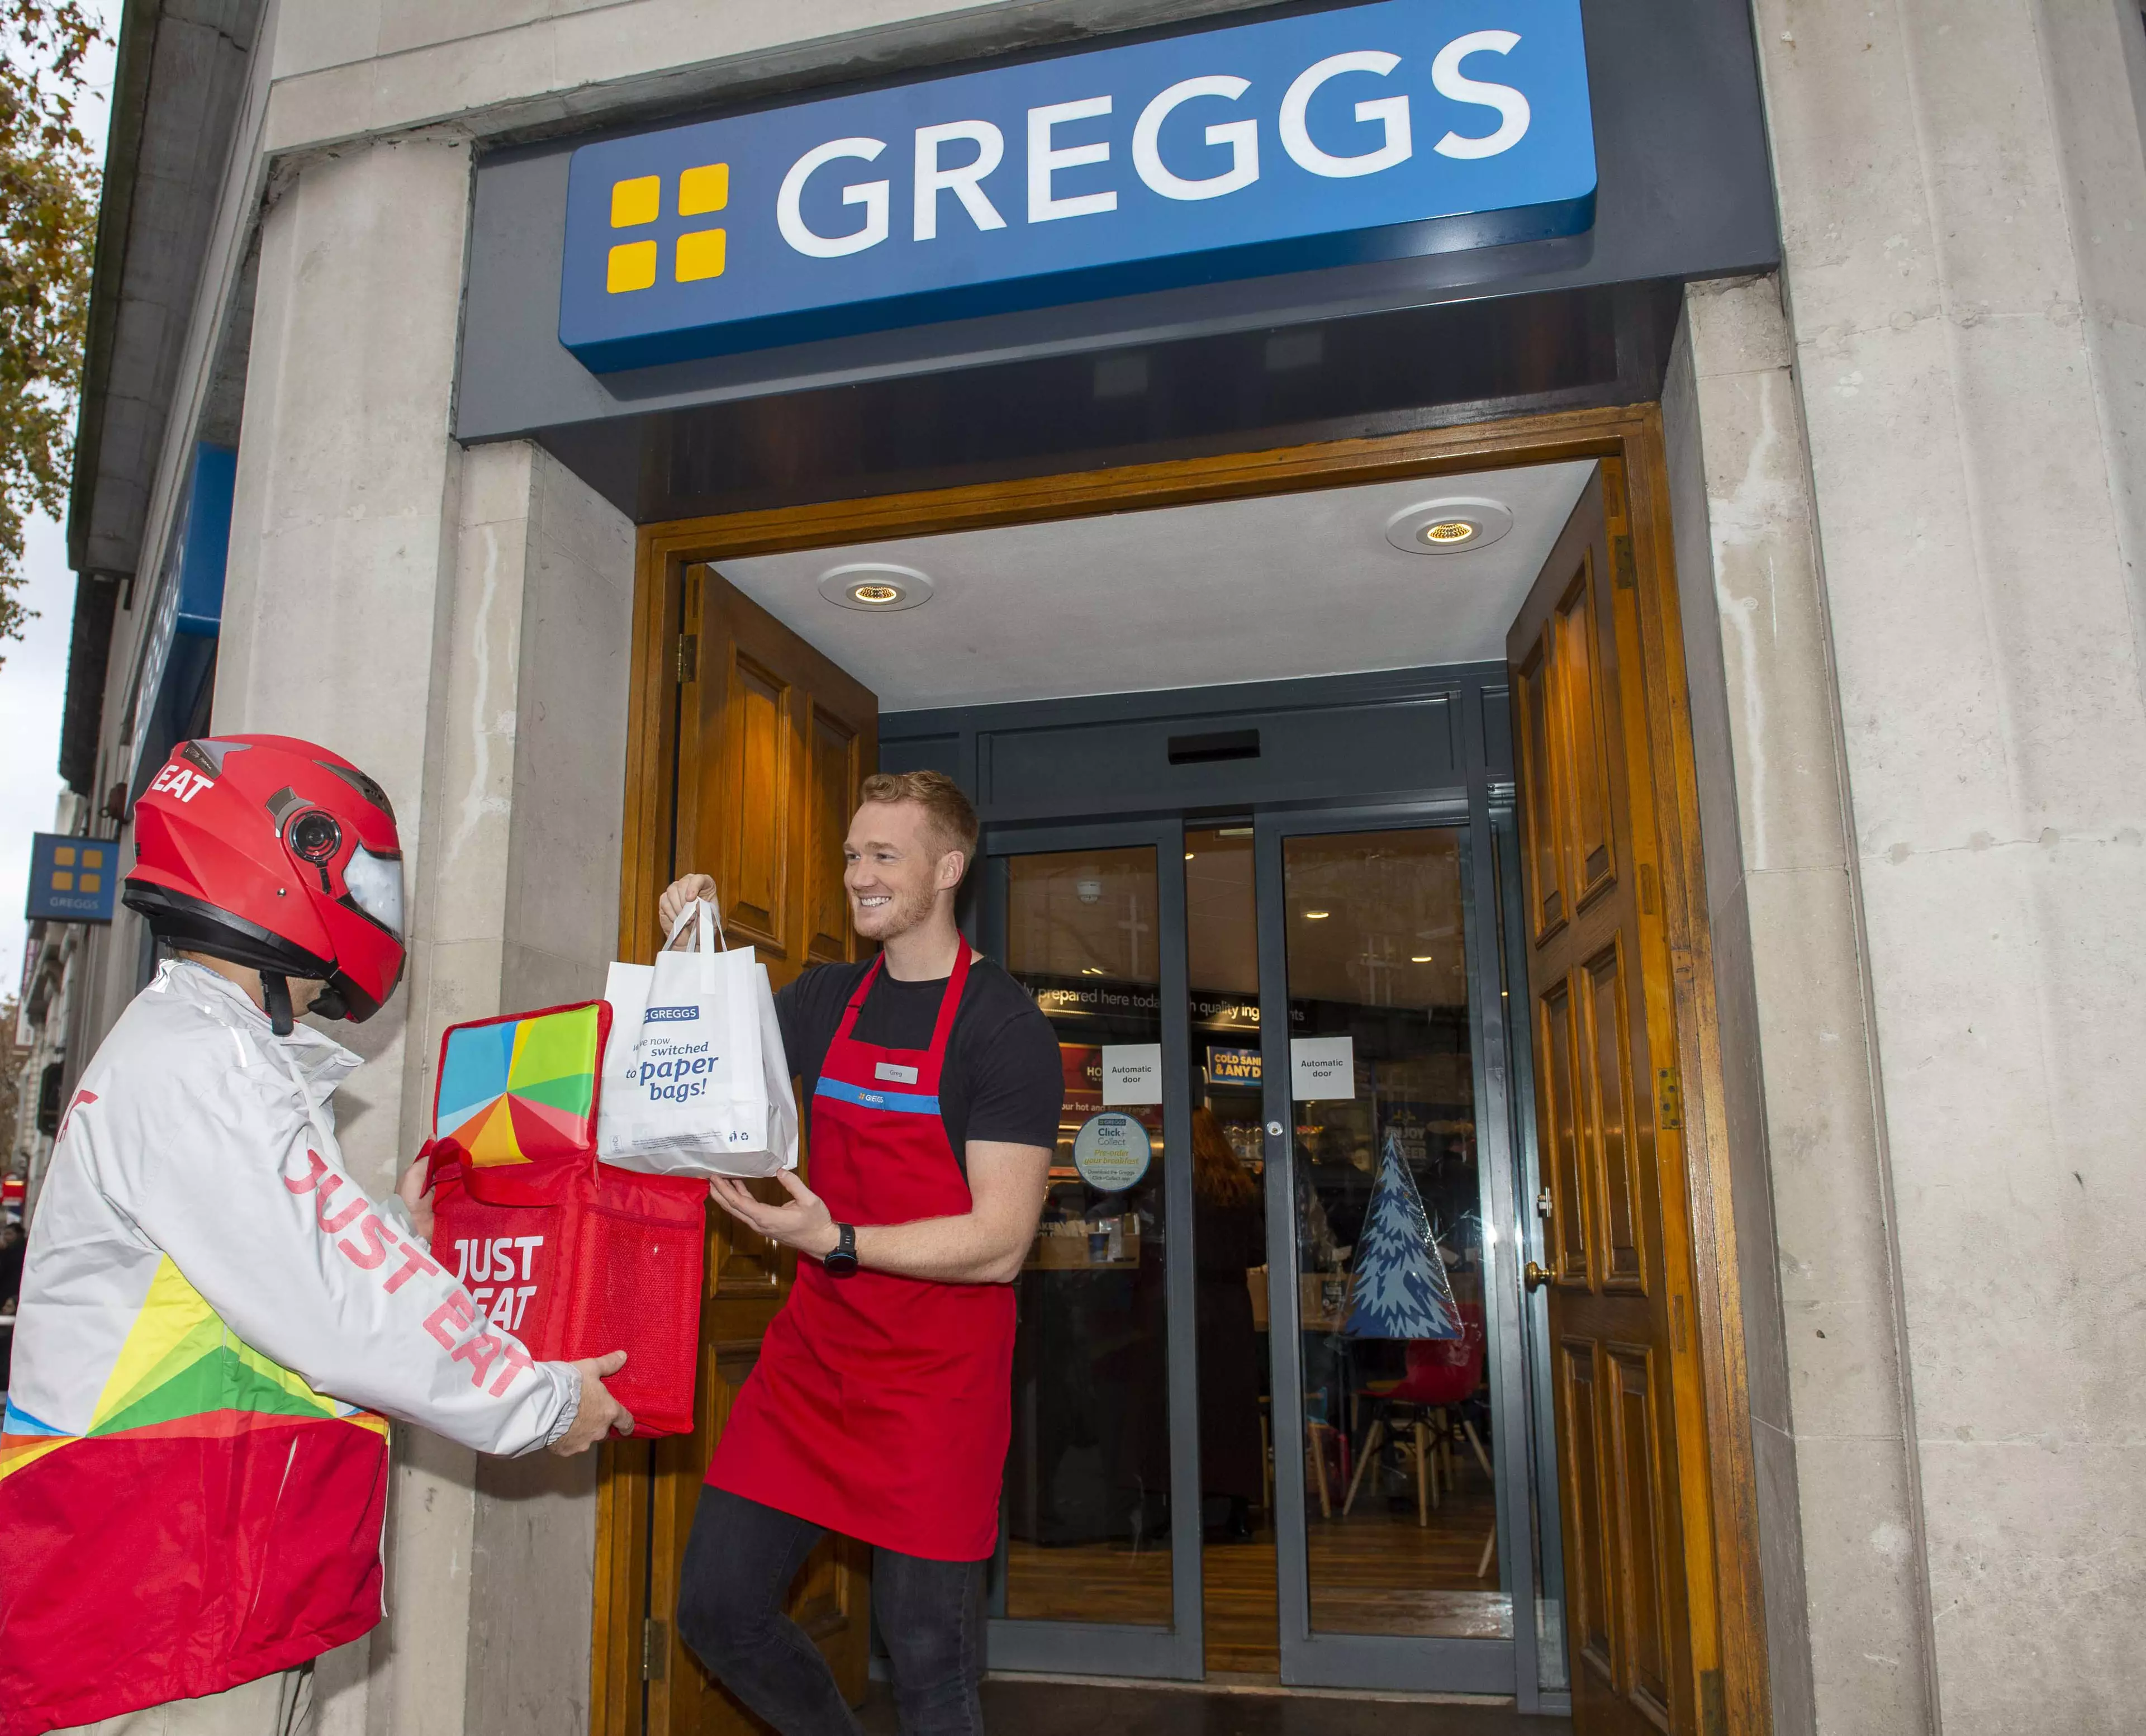 The competition marks the partnership between Greggs and Just Eat.